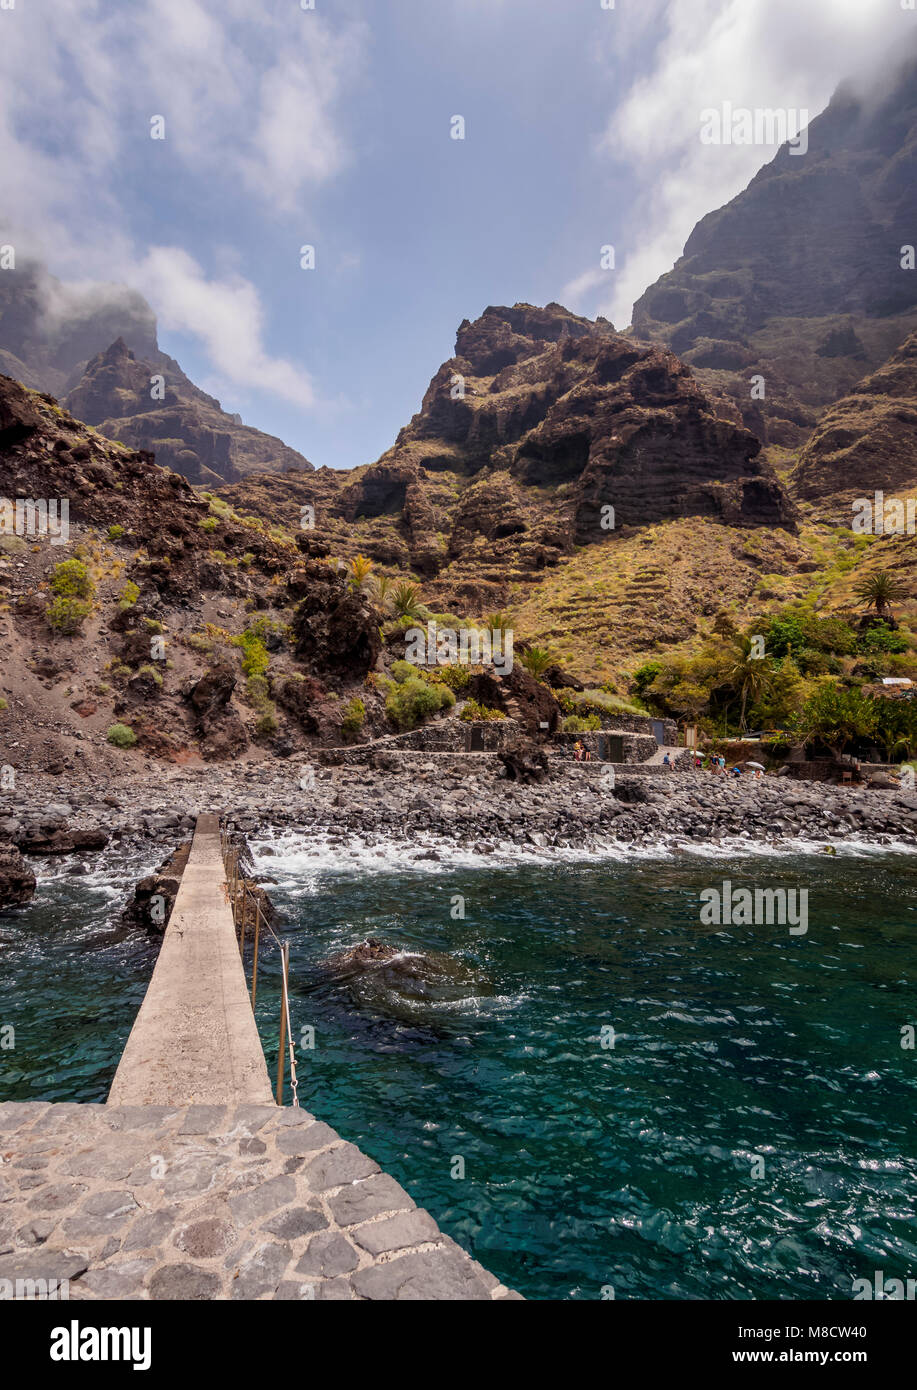 Small port on Masca Beach and Los Gigantes Cliffs, Tenerife Island, Canary Islands, Spain Stock Photo